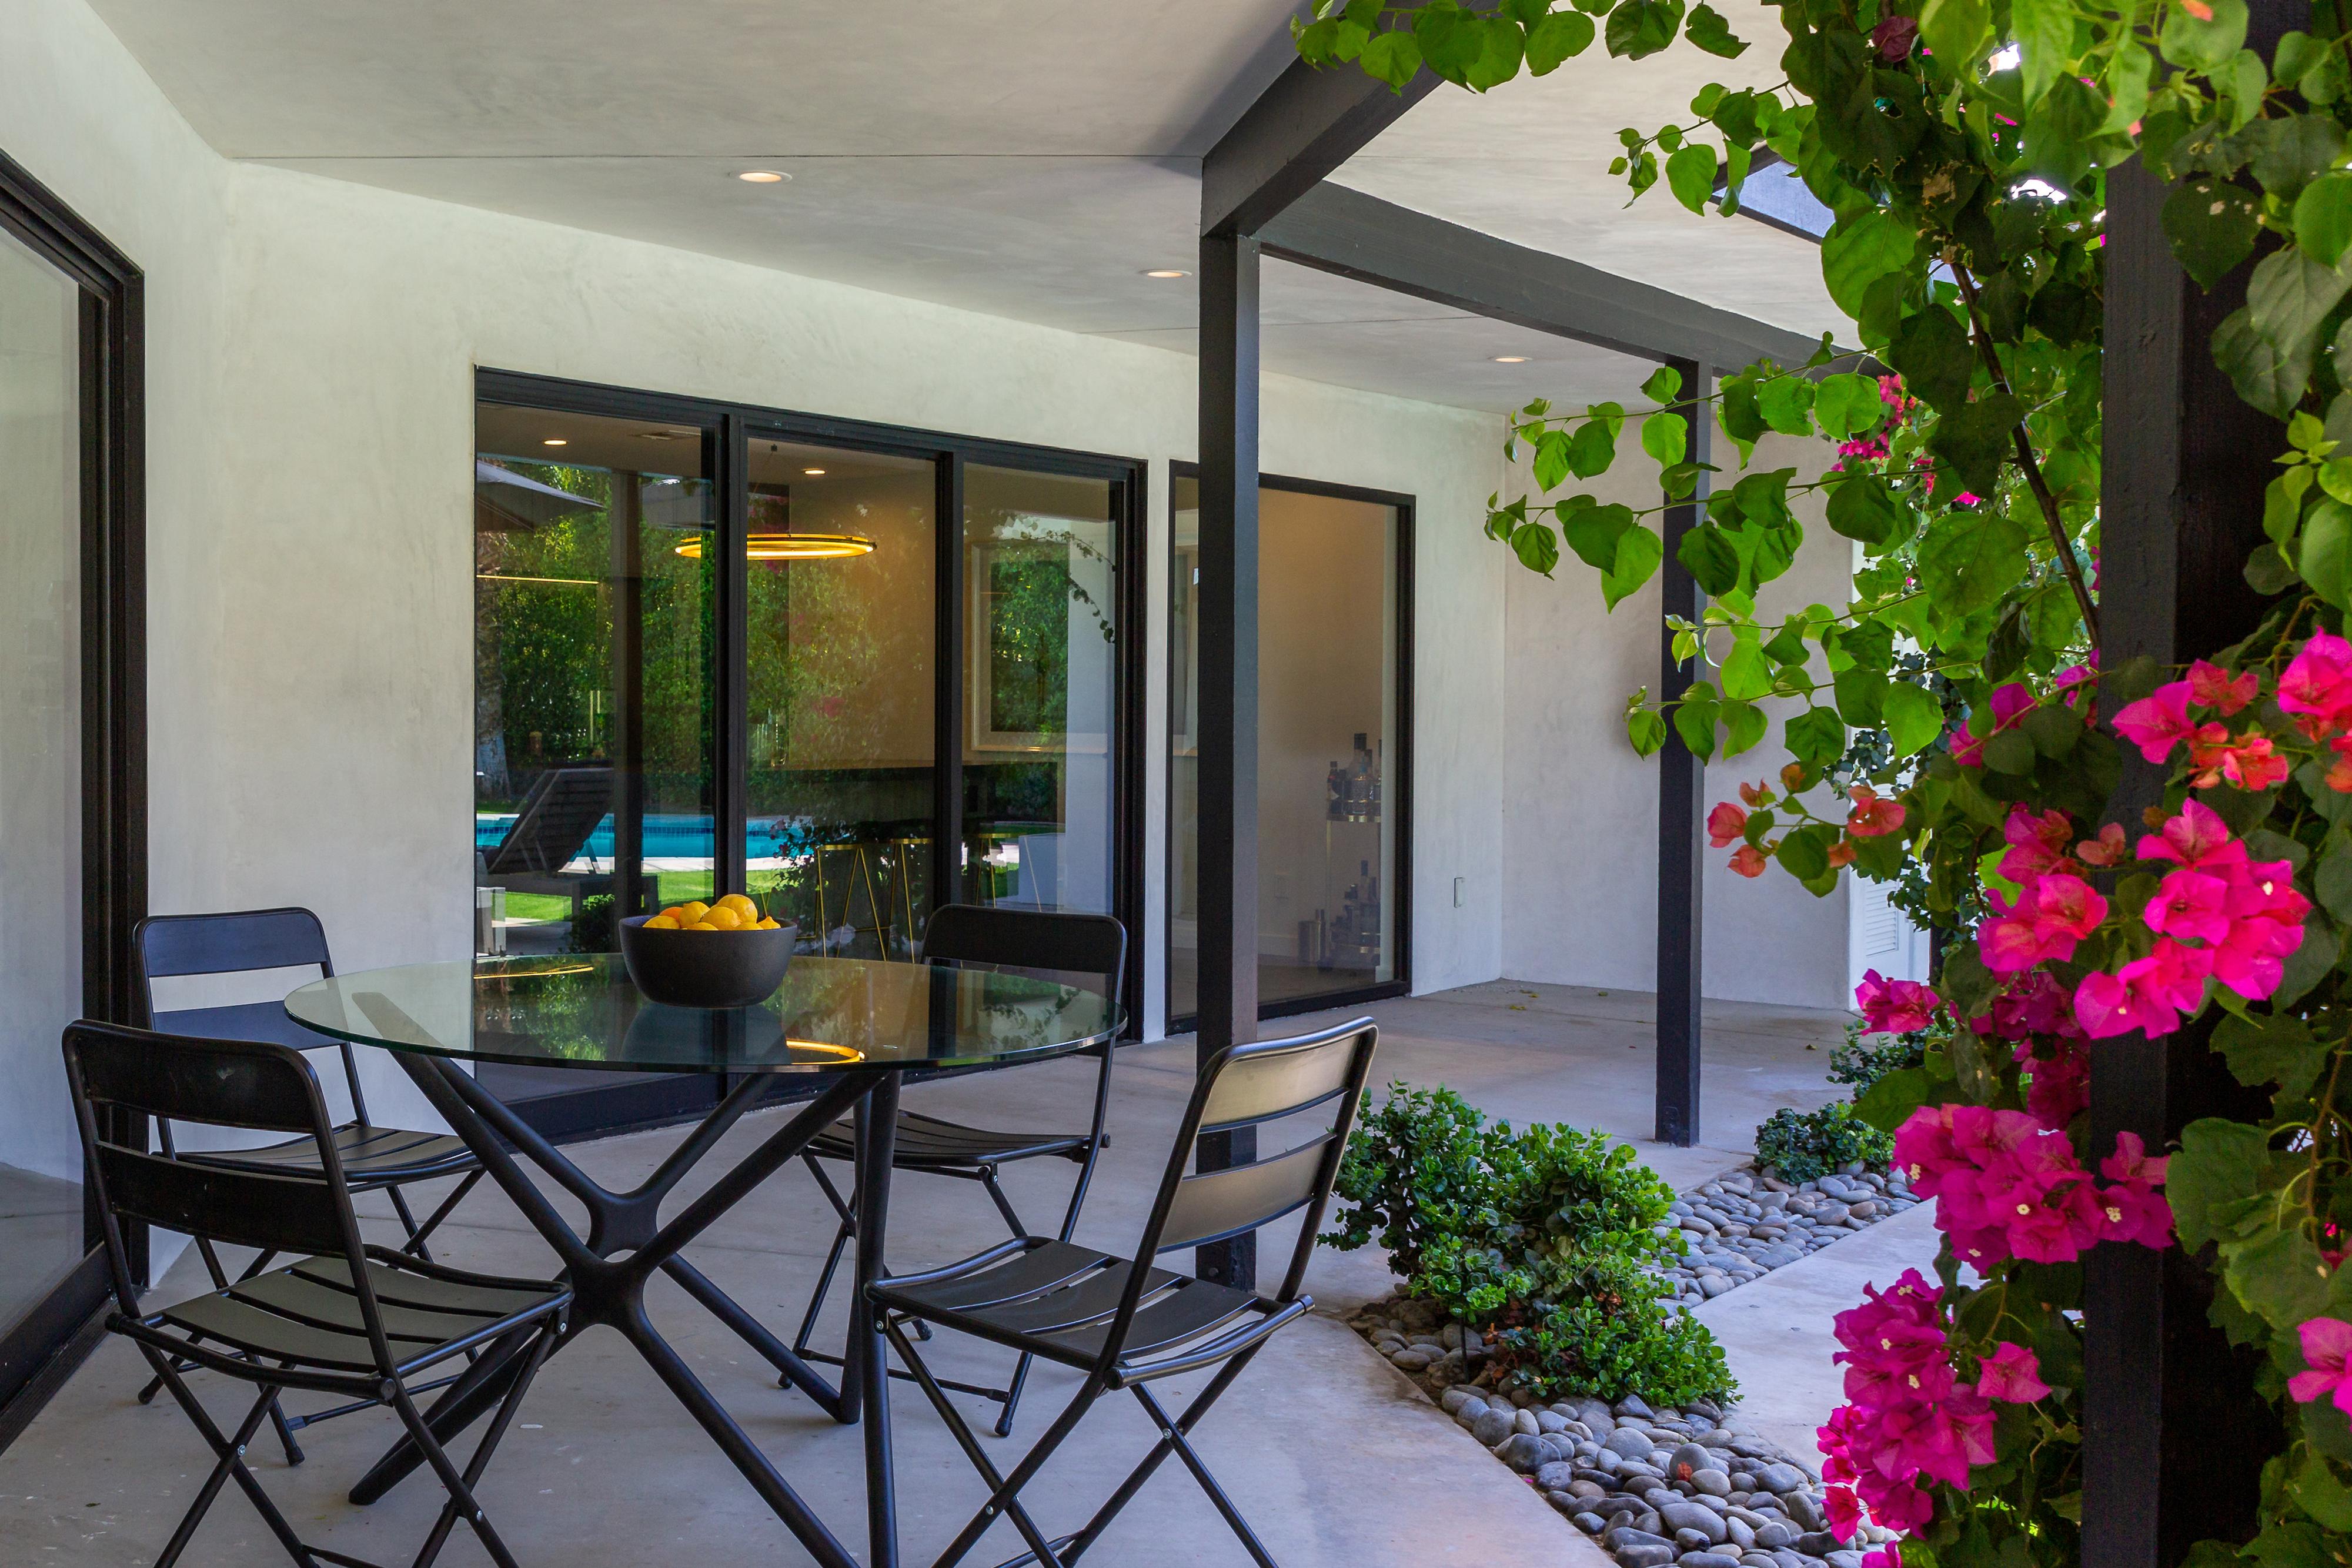 vacation rentals united states california palm springs